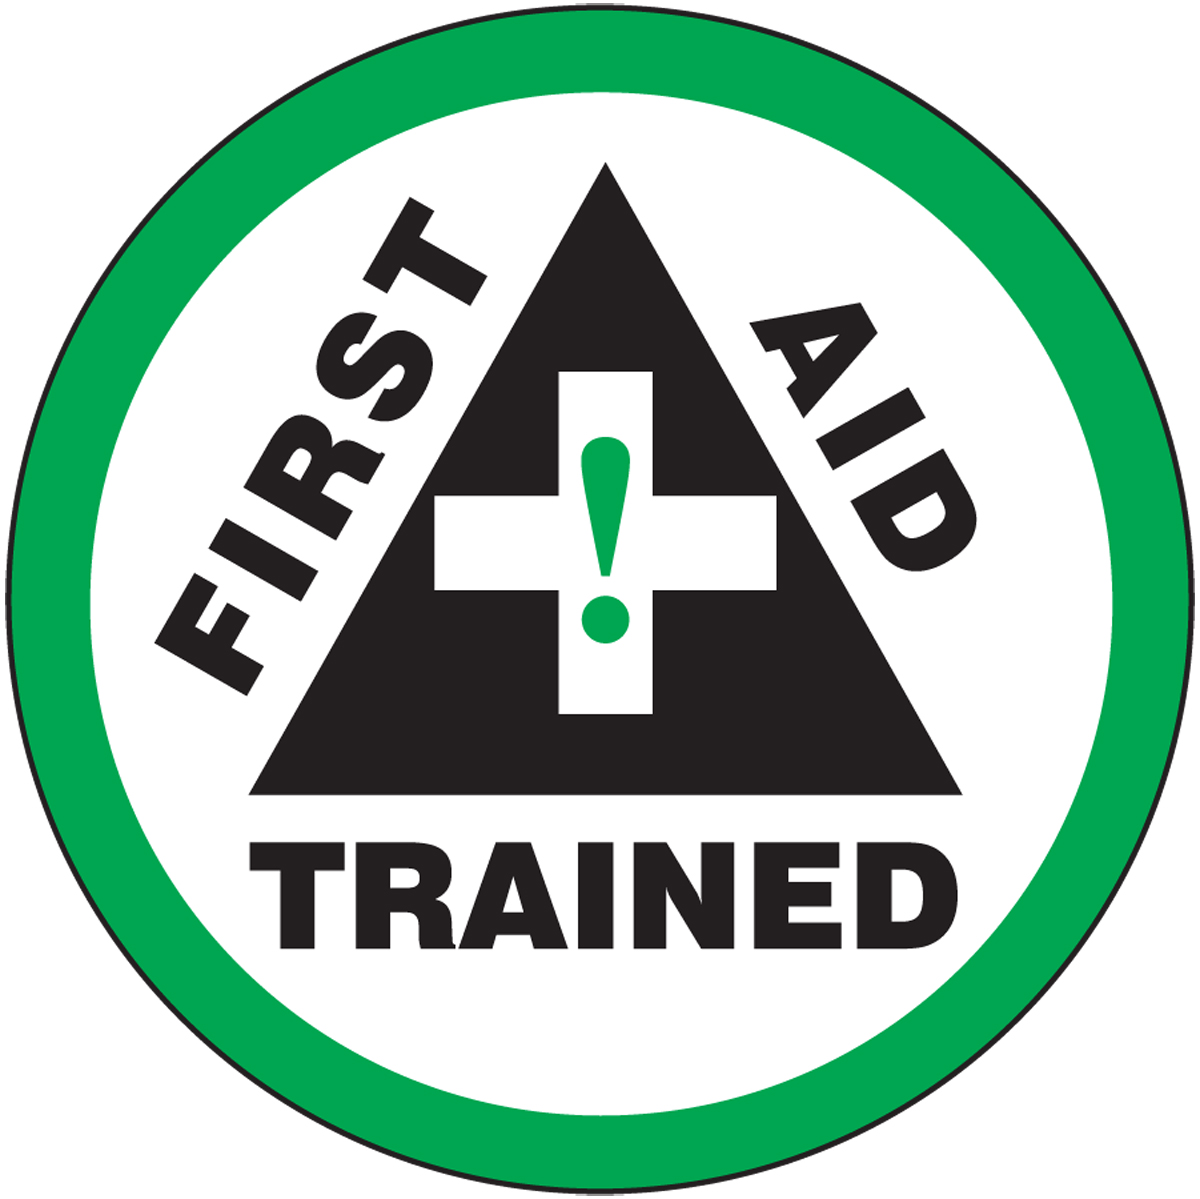 FIRST AID TRAINED (W/GRAPHIC)